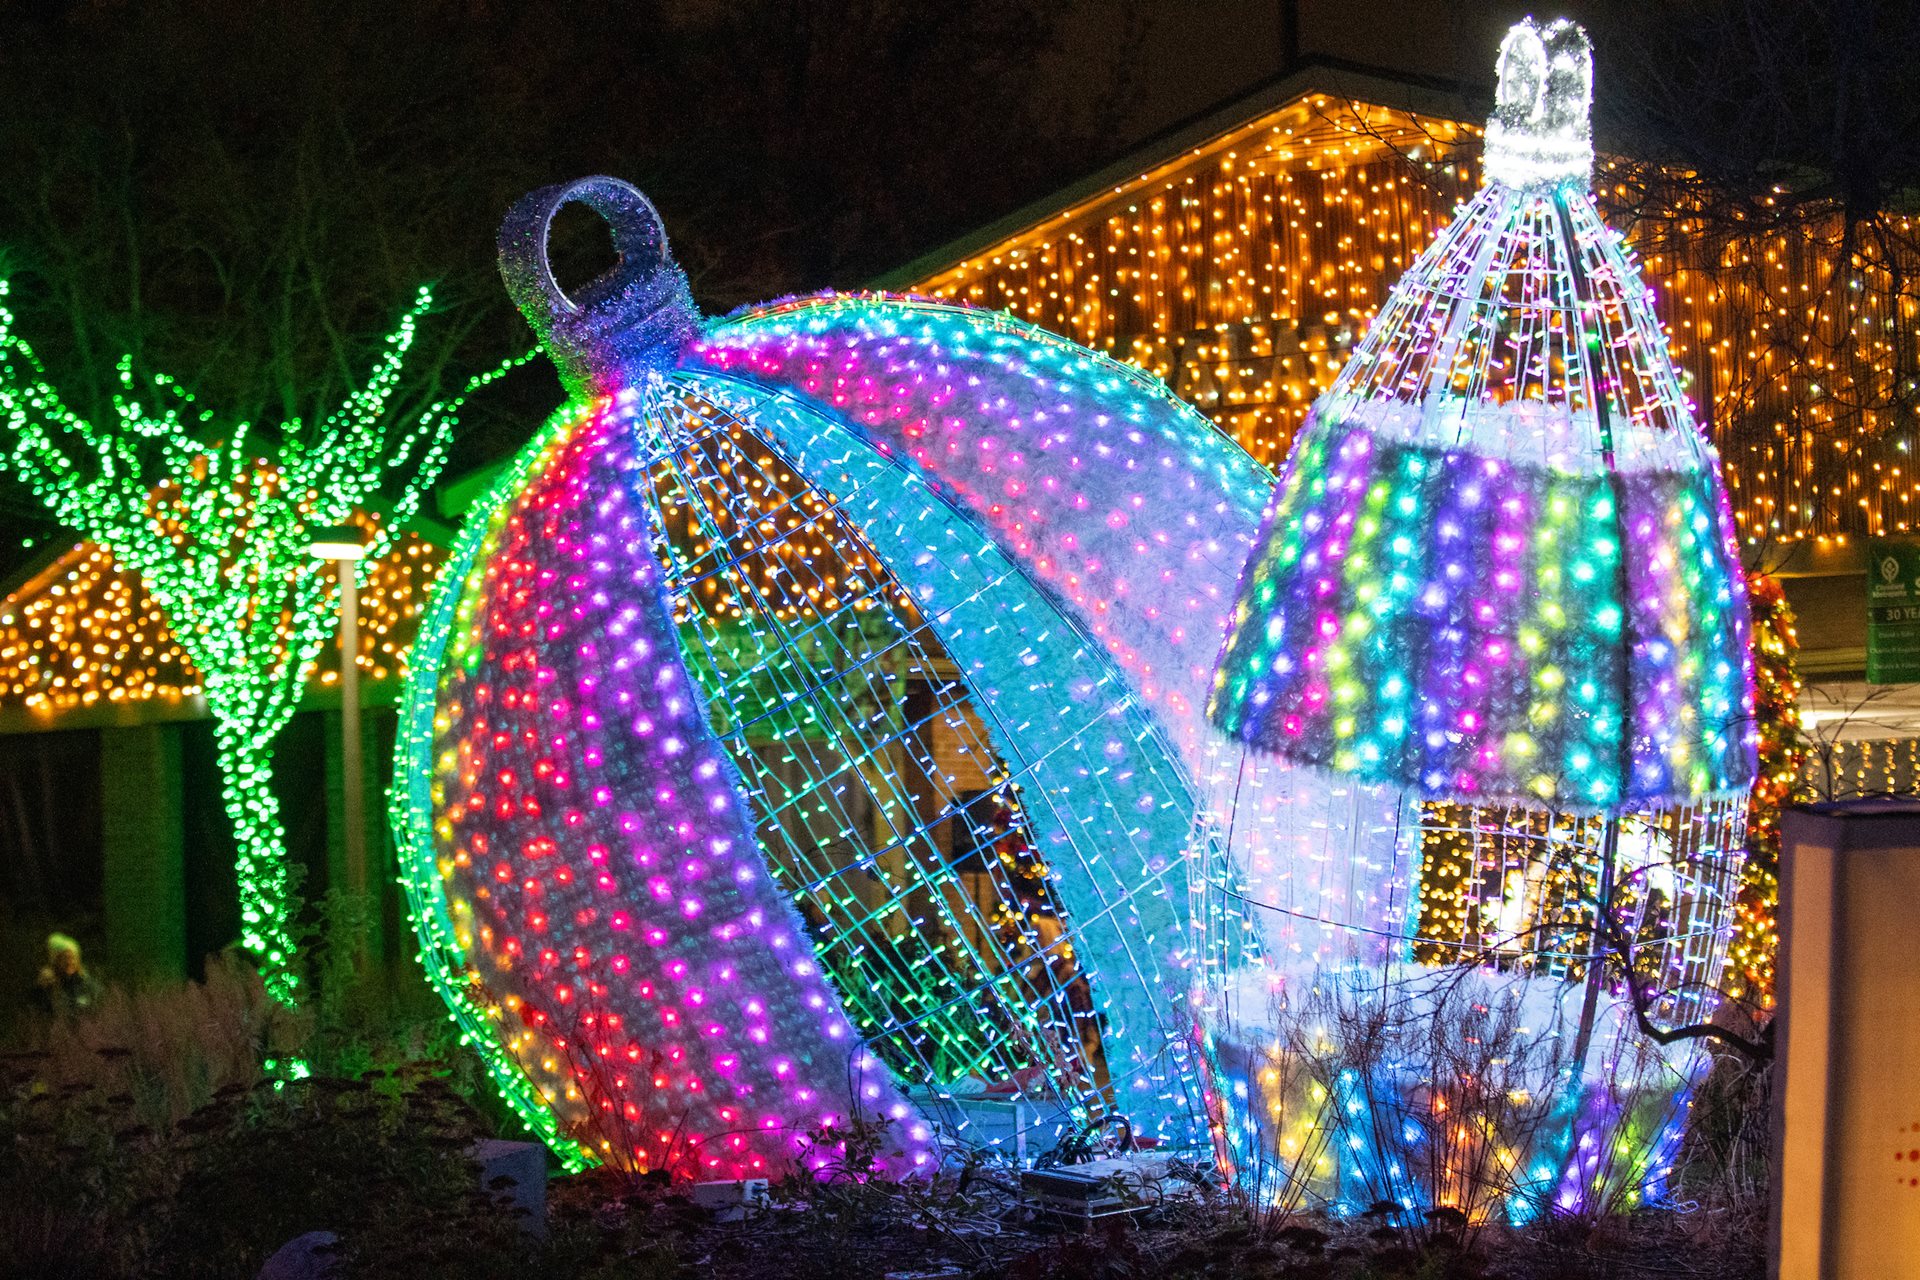 Cleveland Metroparks Zoo Announces the Return of Wild Winter Lights Presented by NOPEC